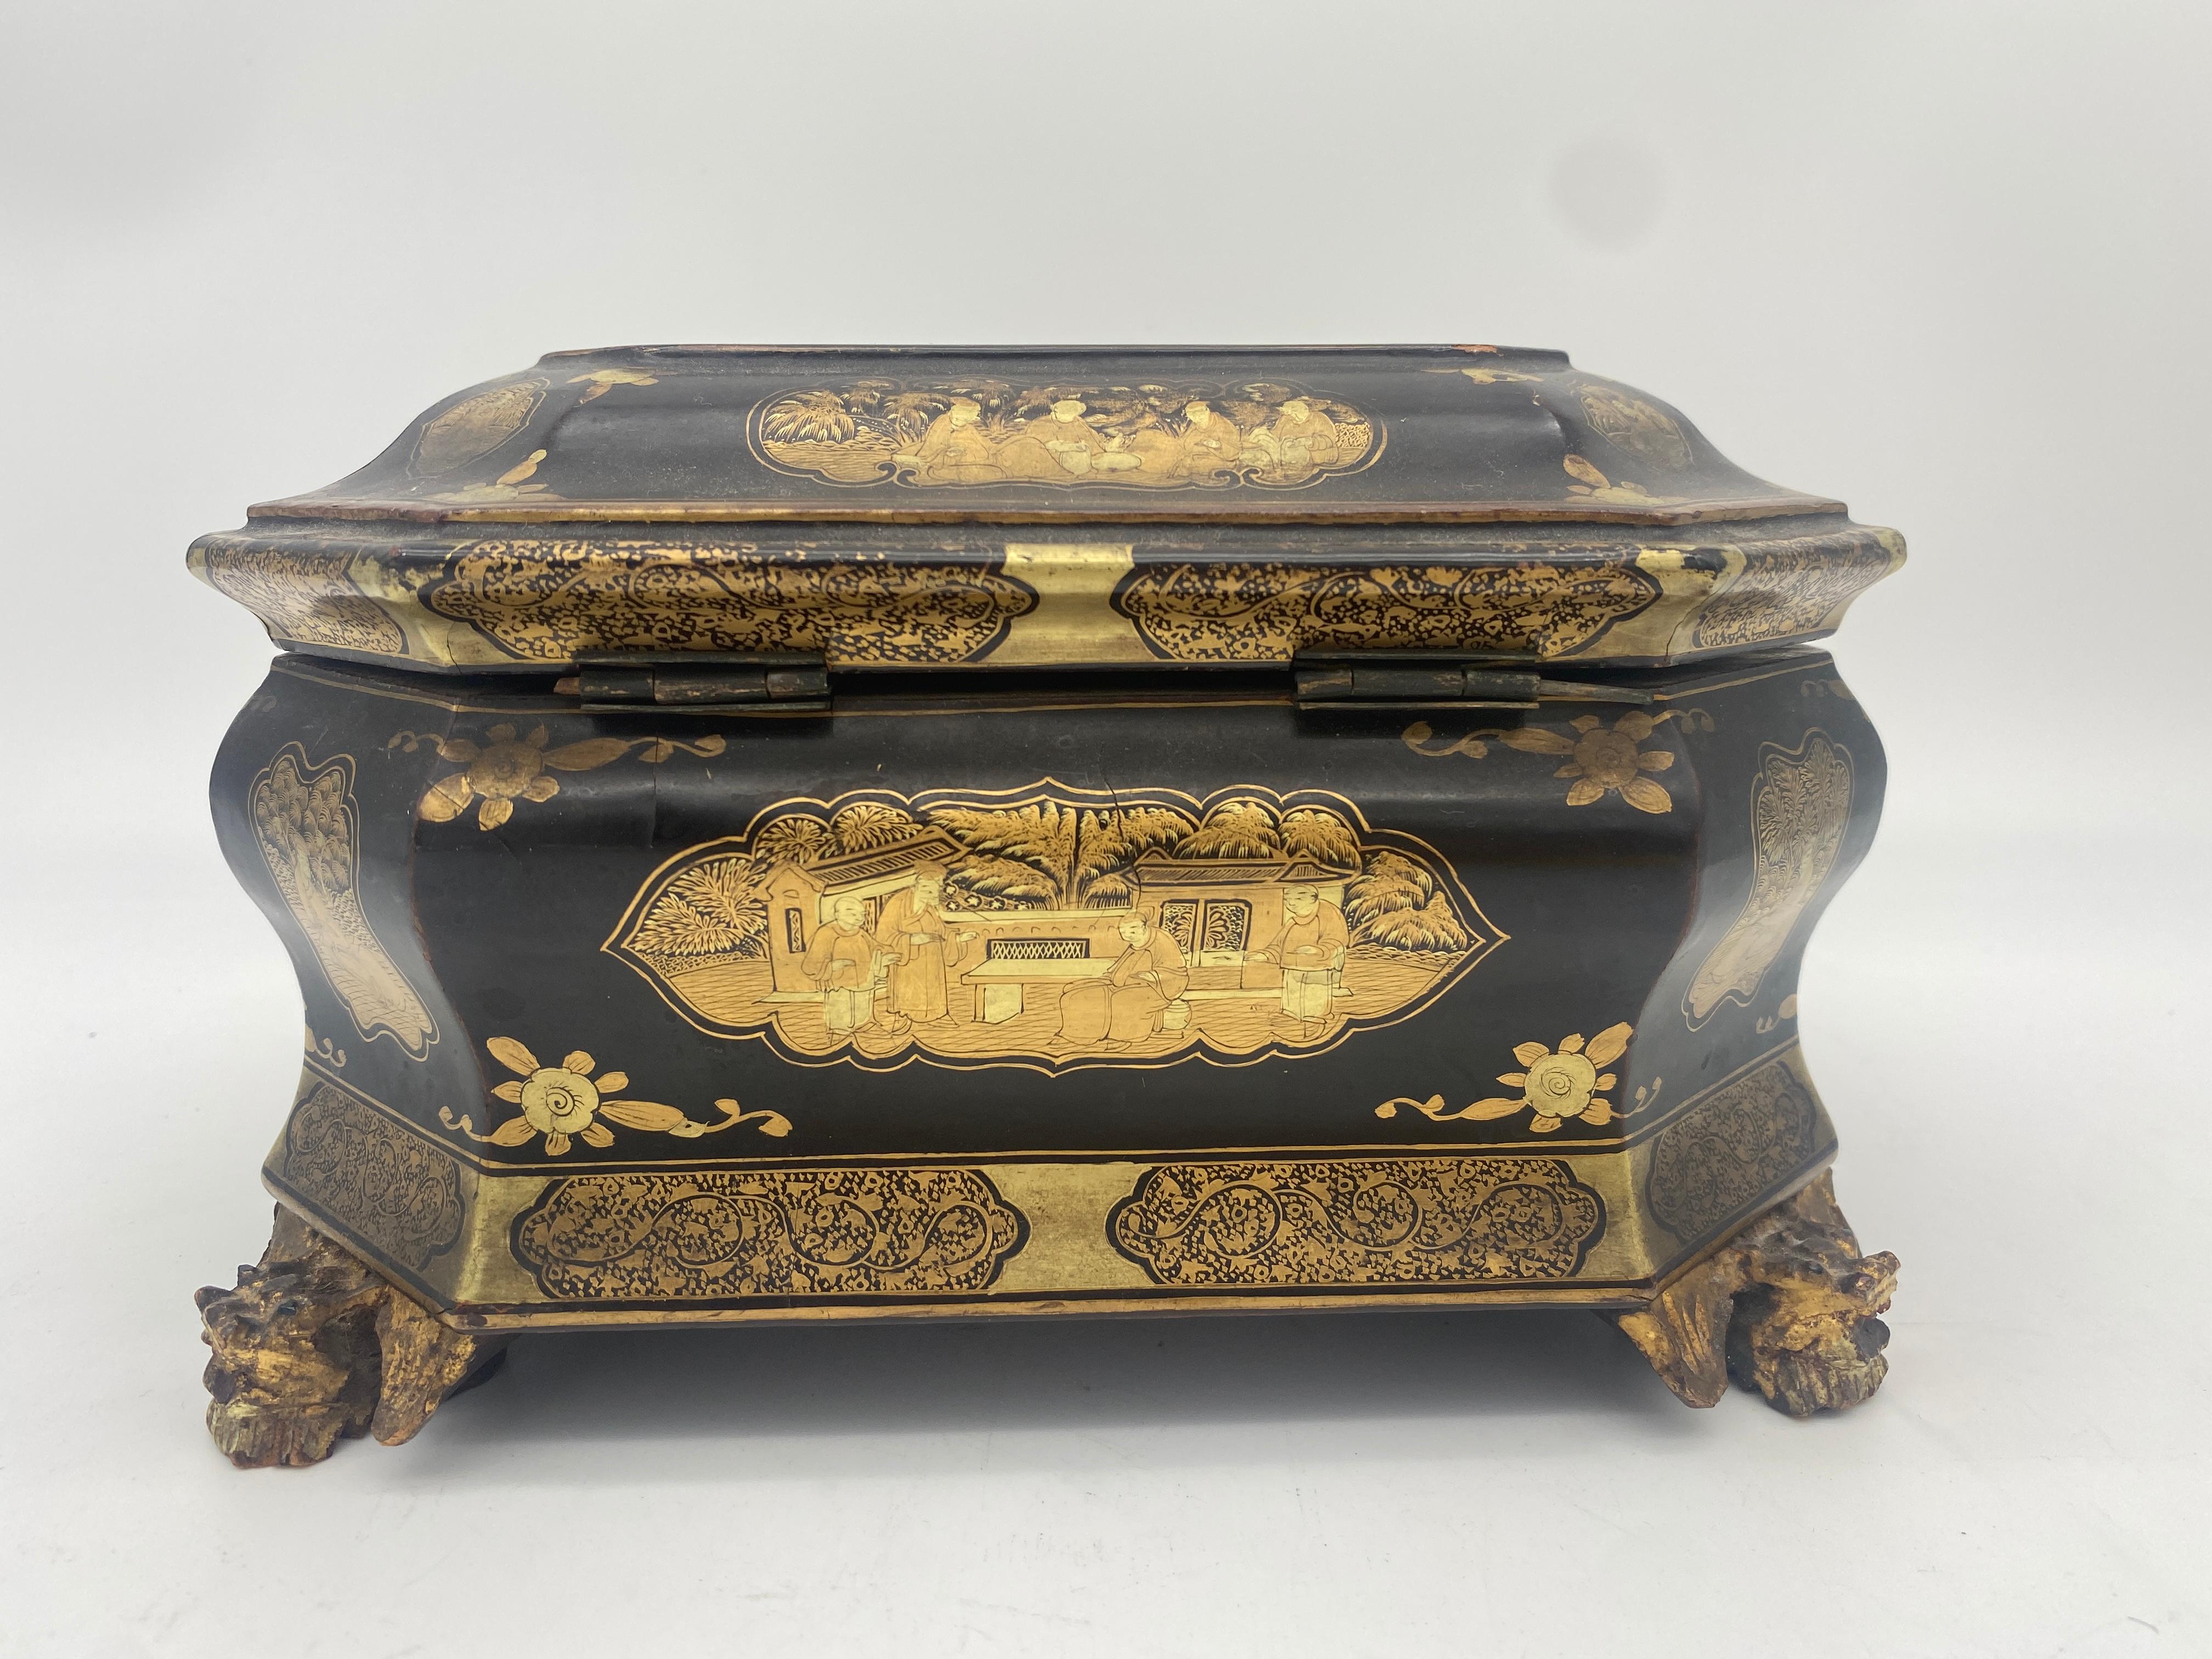 19th Century Antique Gilt Lacquer Chinese Tea Caddy For Sale 2